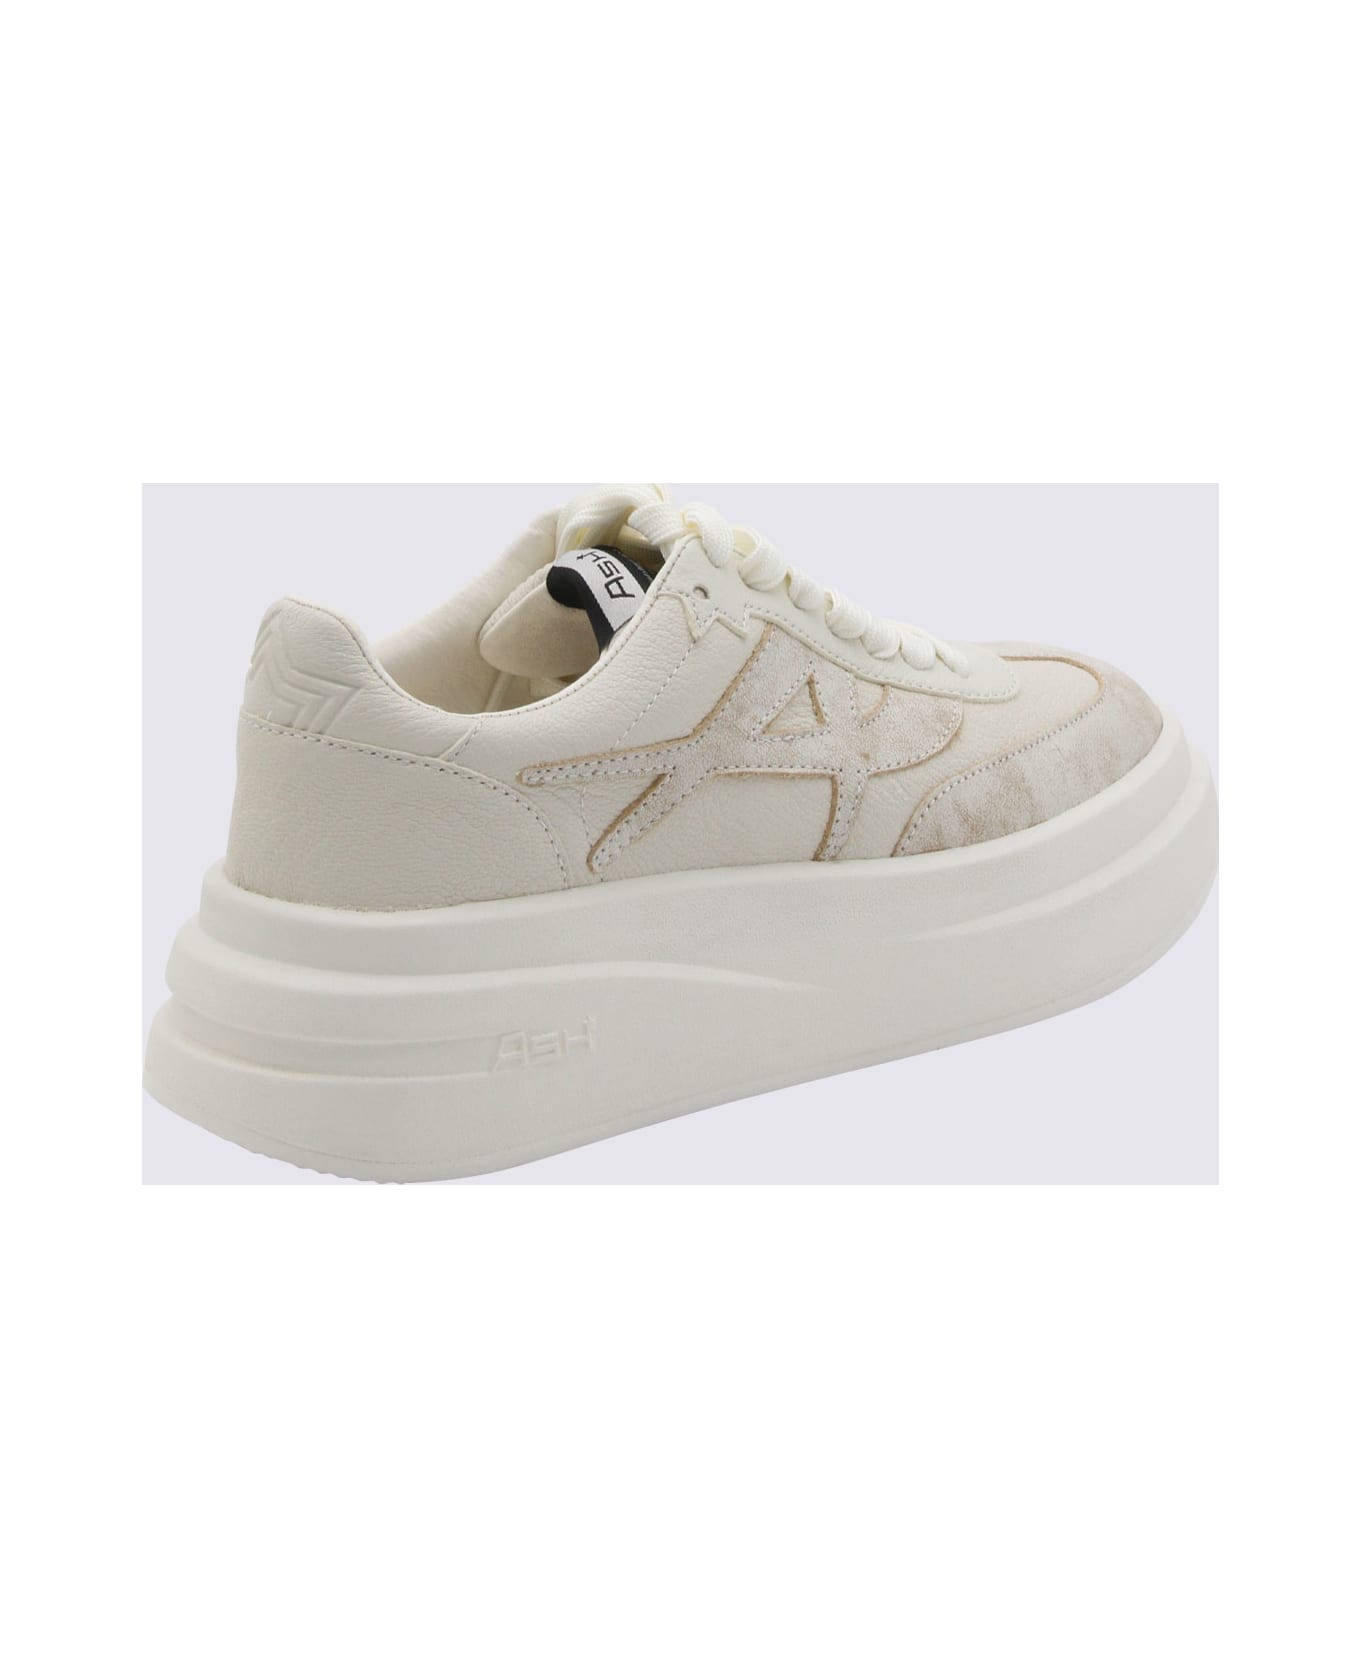 Ash White And Beige Leather Sneakers - BEIGE/WHITE